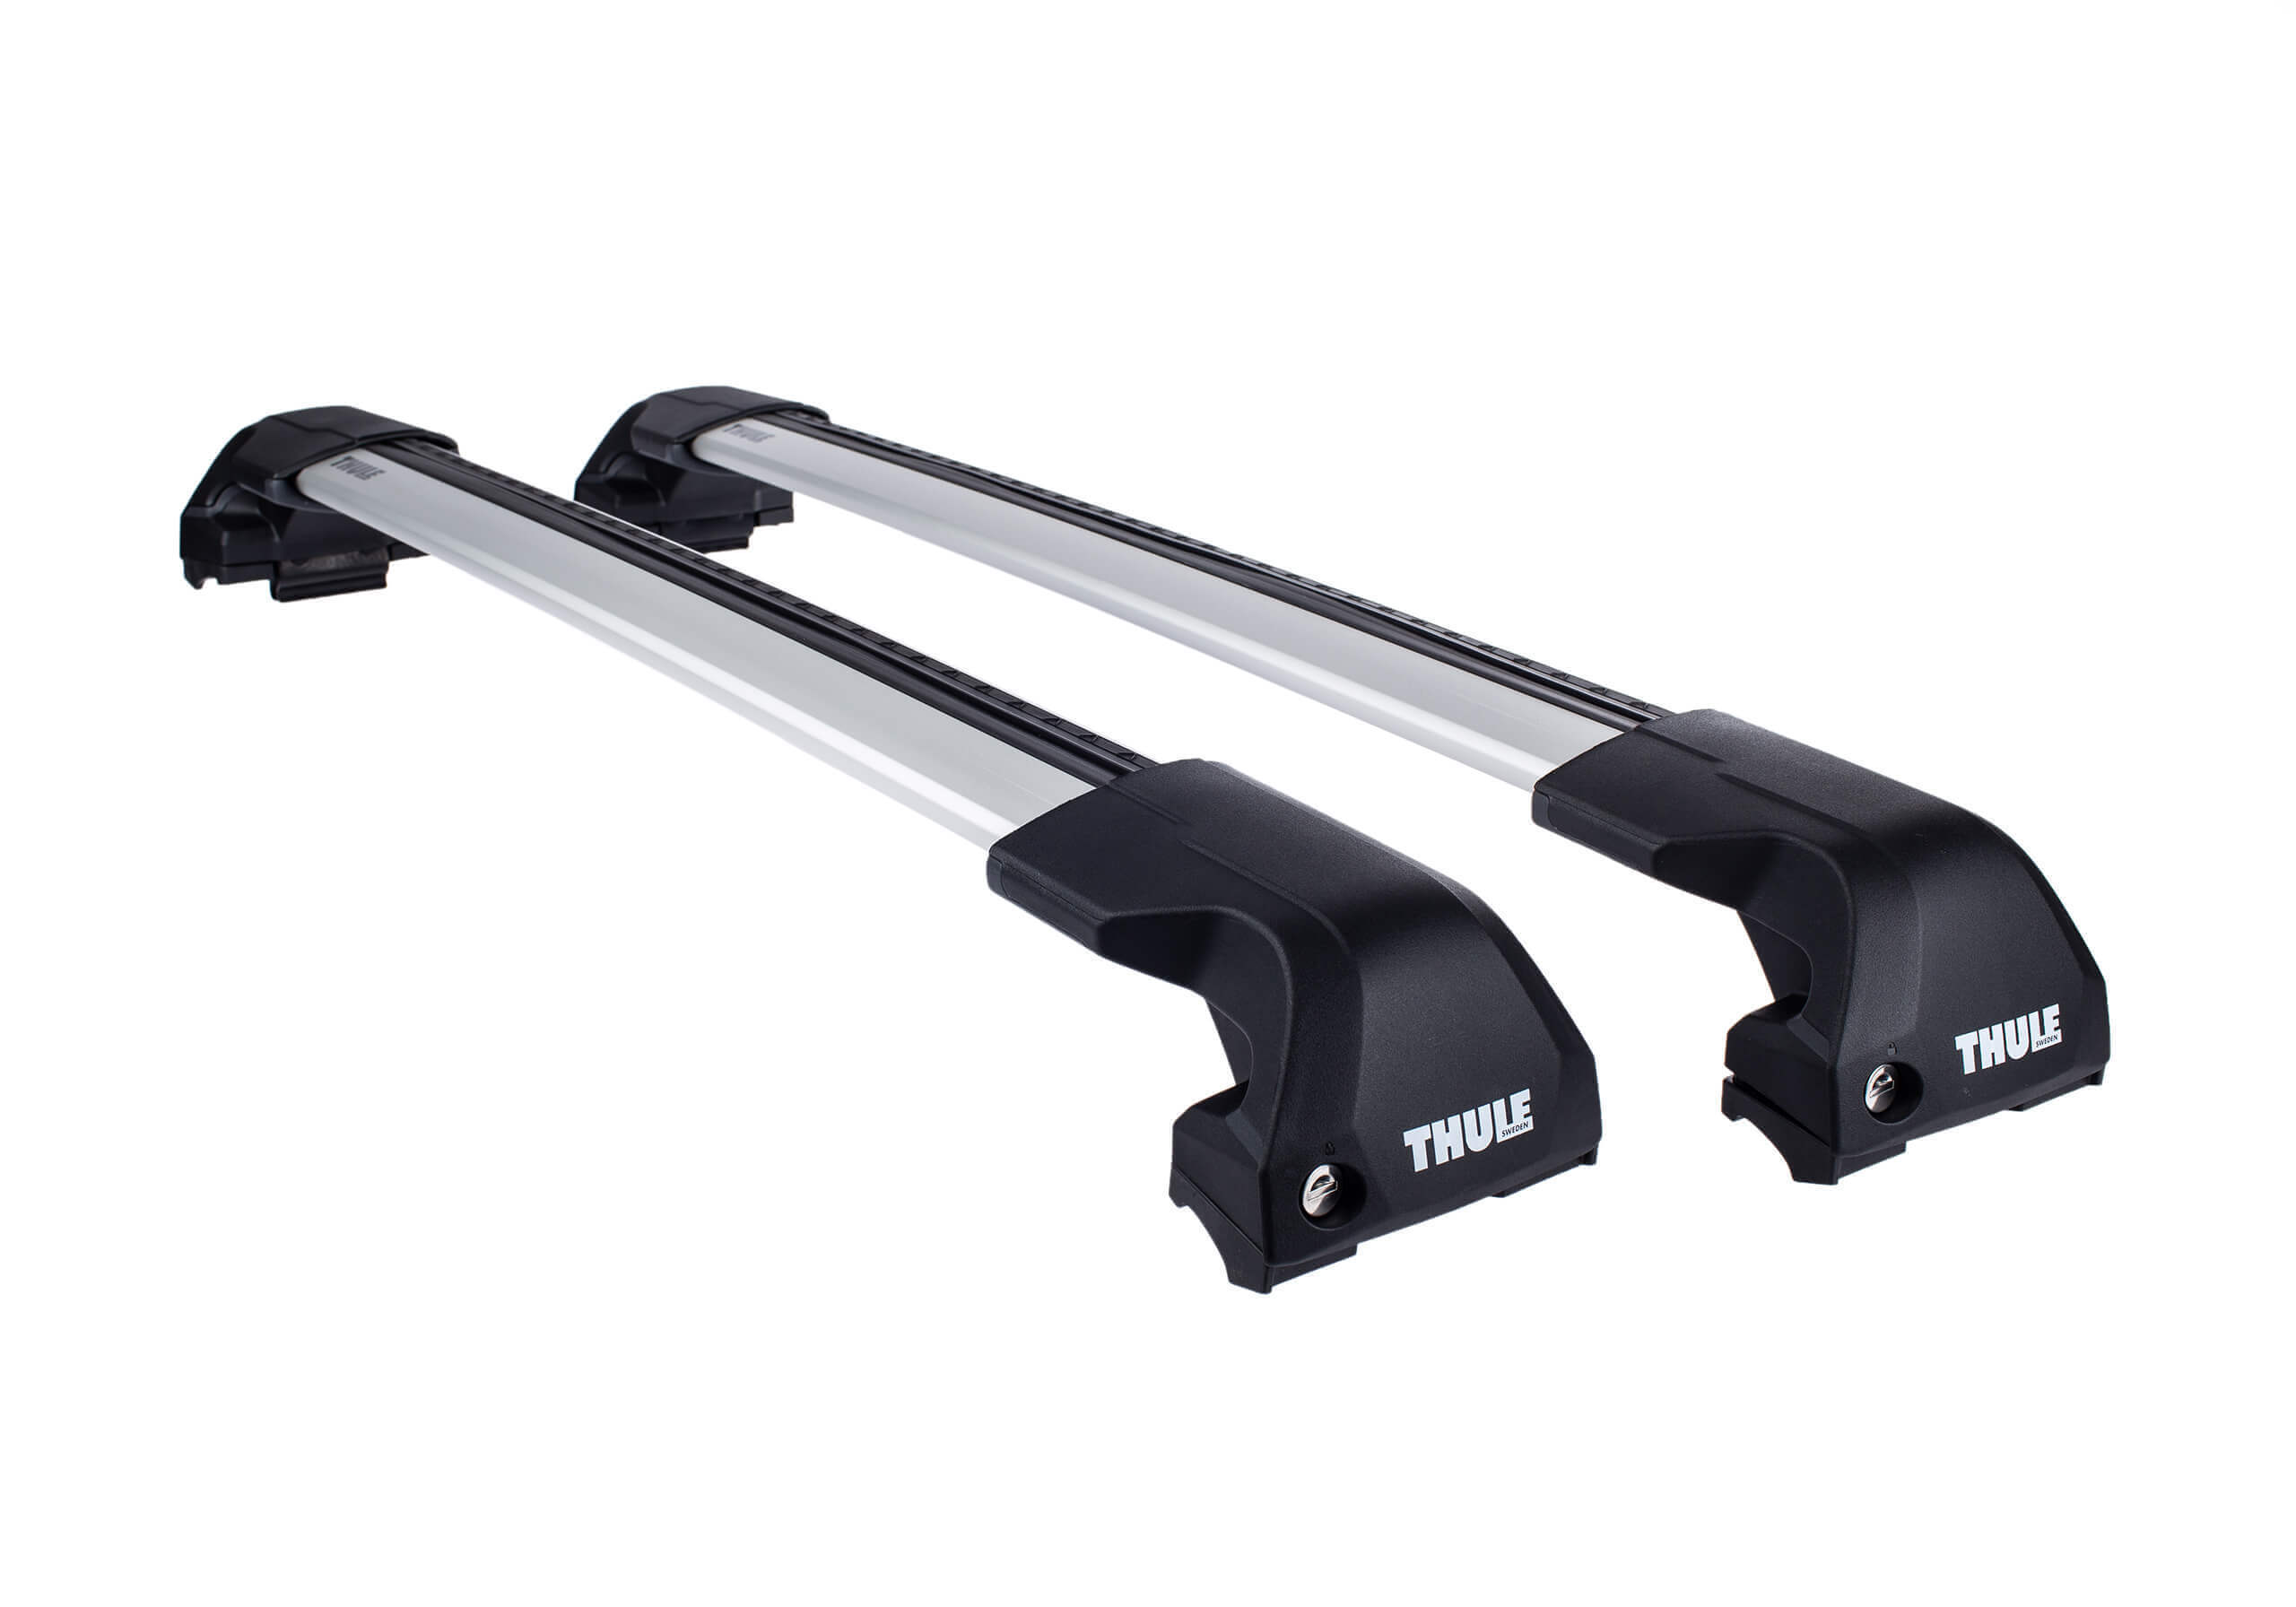 BMW X1 (2015 to 2022):Thule Edge silver WingBars package - 7206, 7214 x 2, 6007